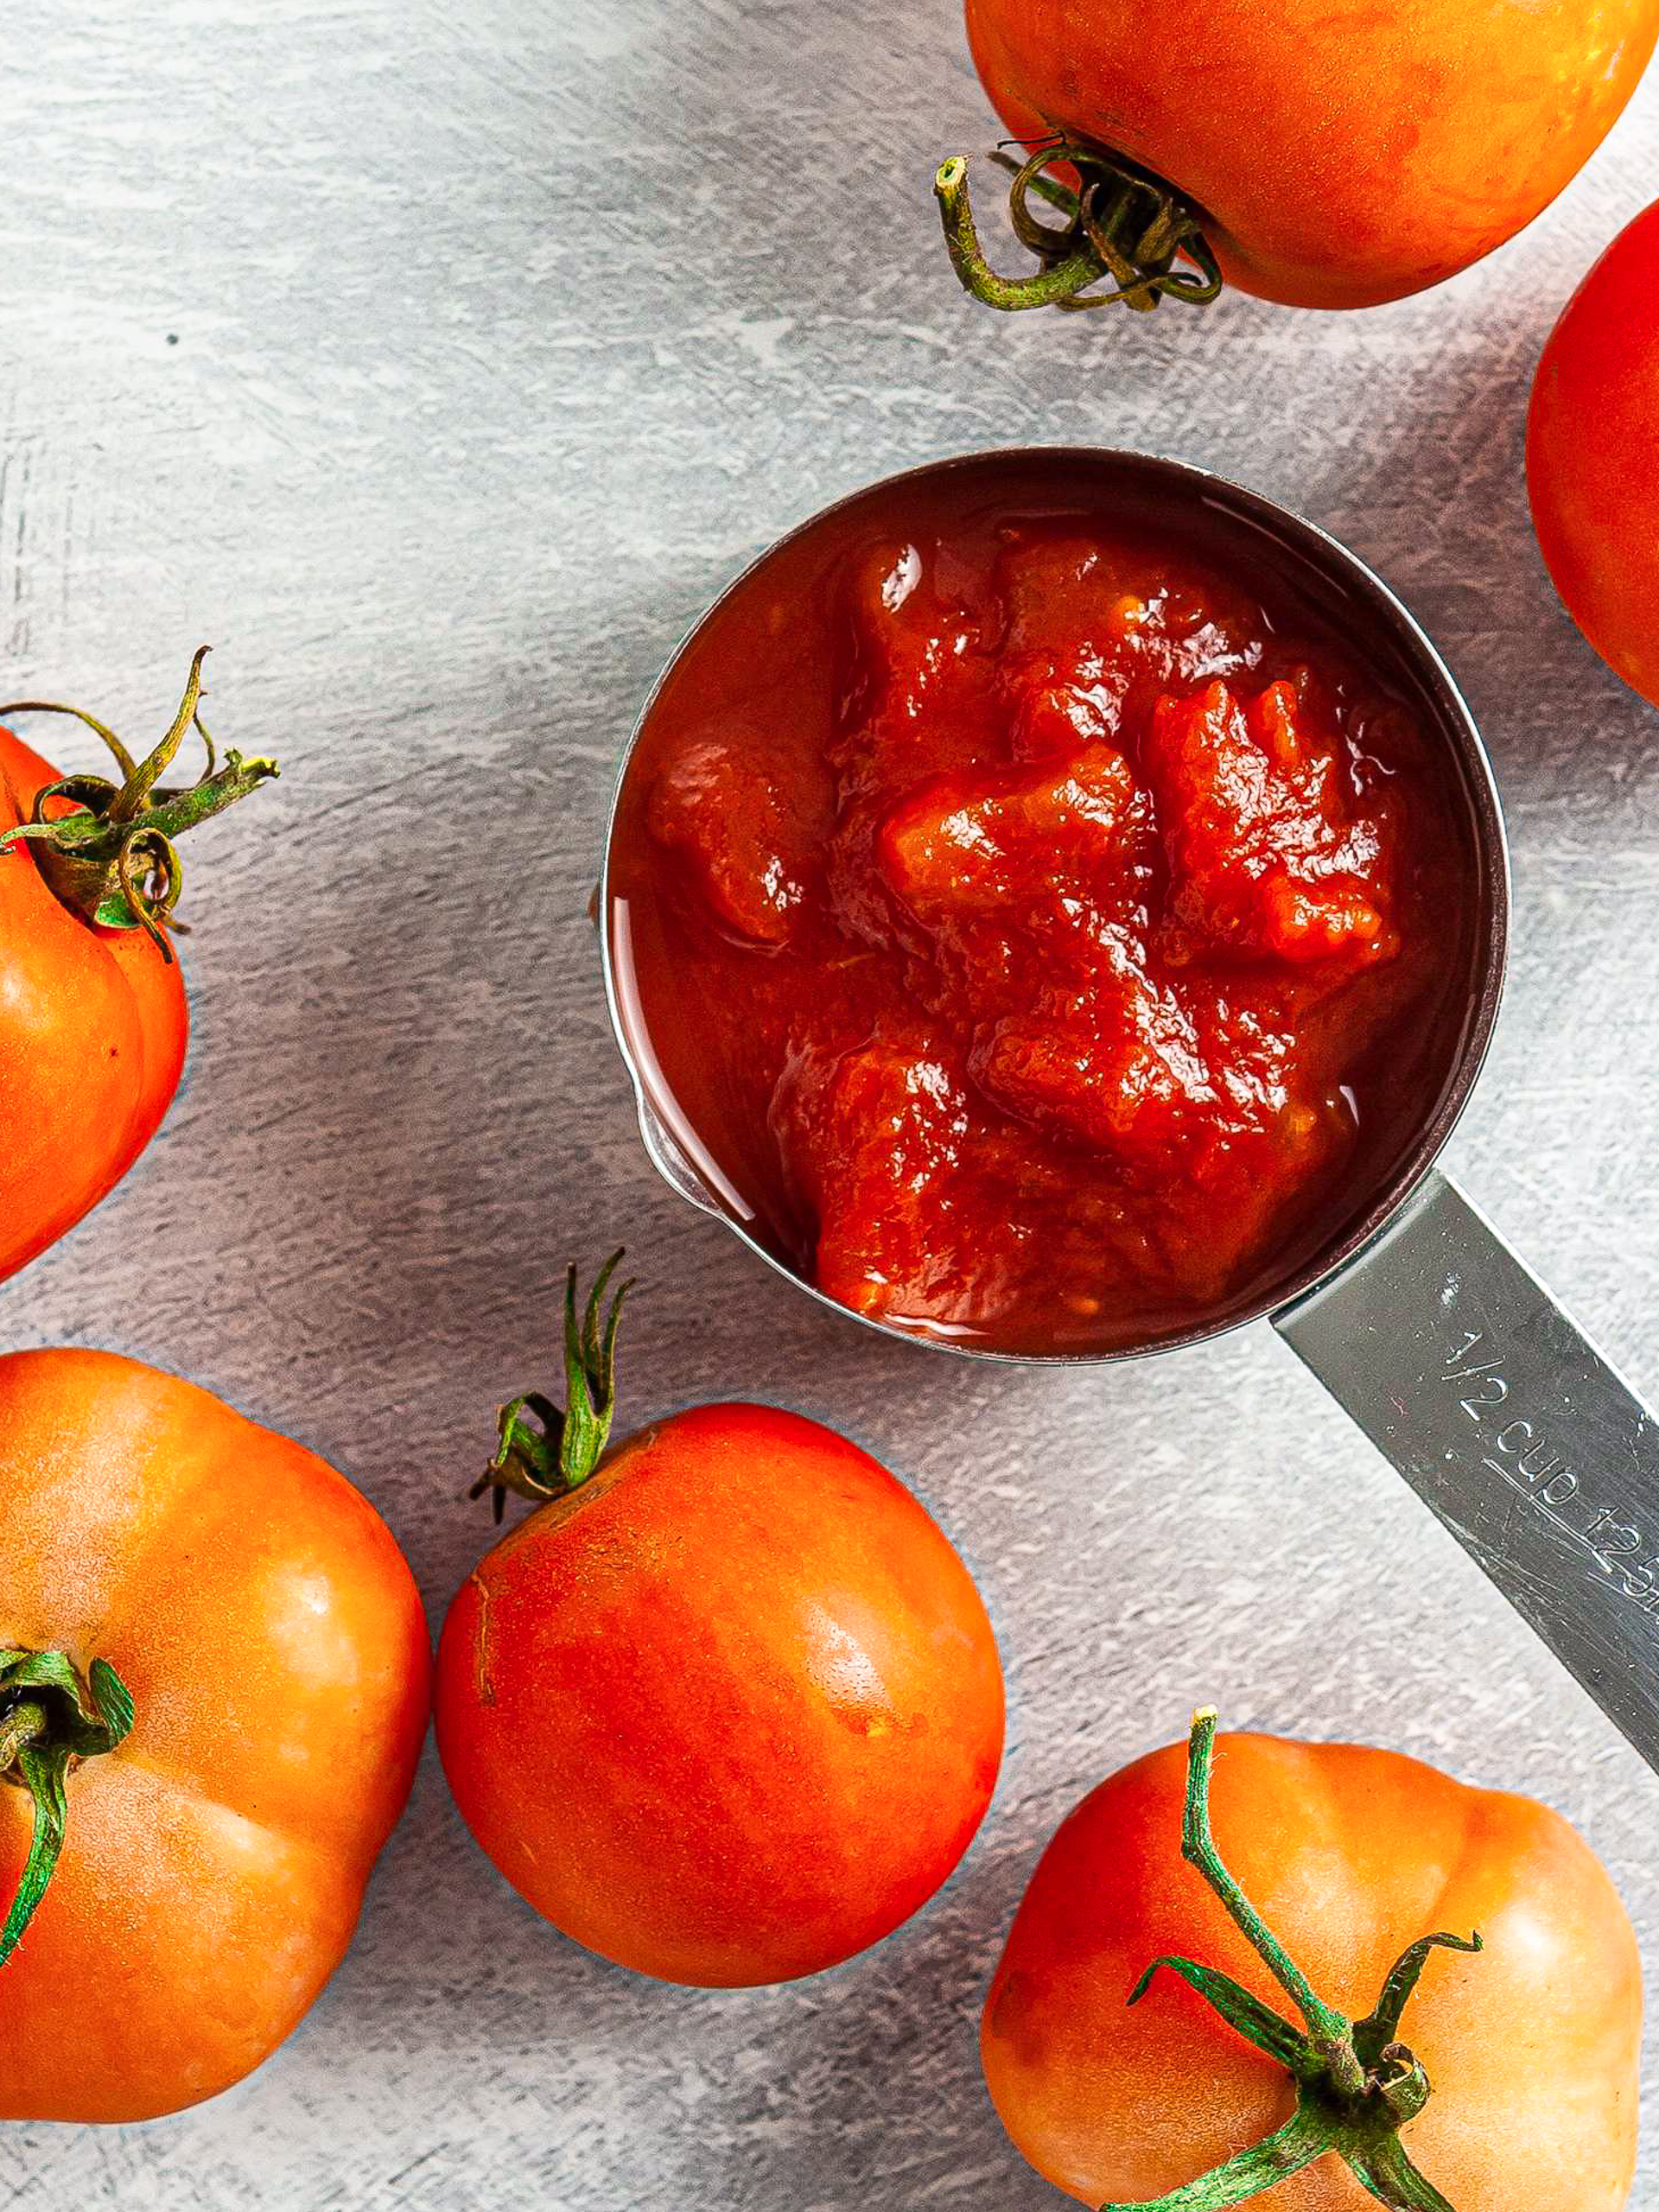 10 Ways To Use Up a Can of Tomato Sauce (Beyond Pasta)